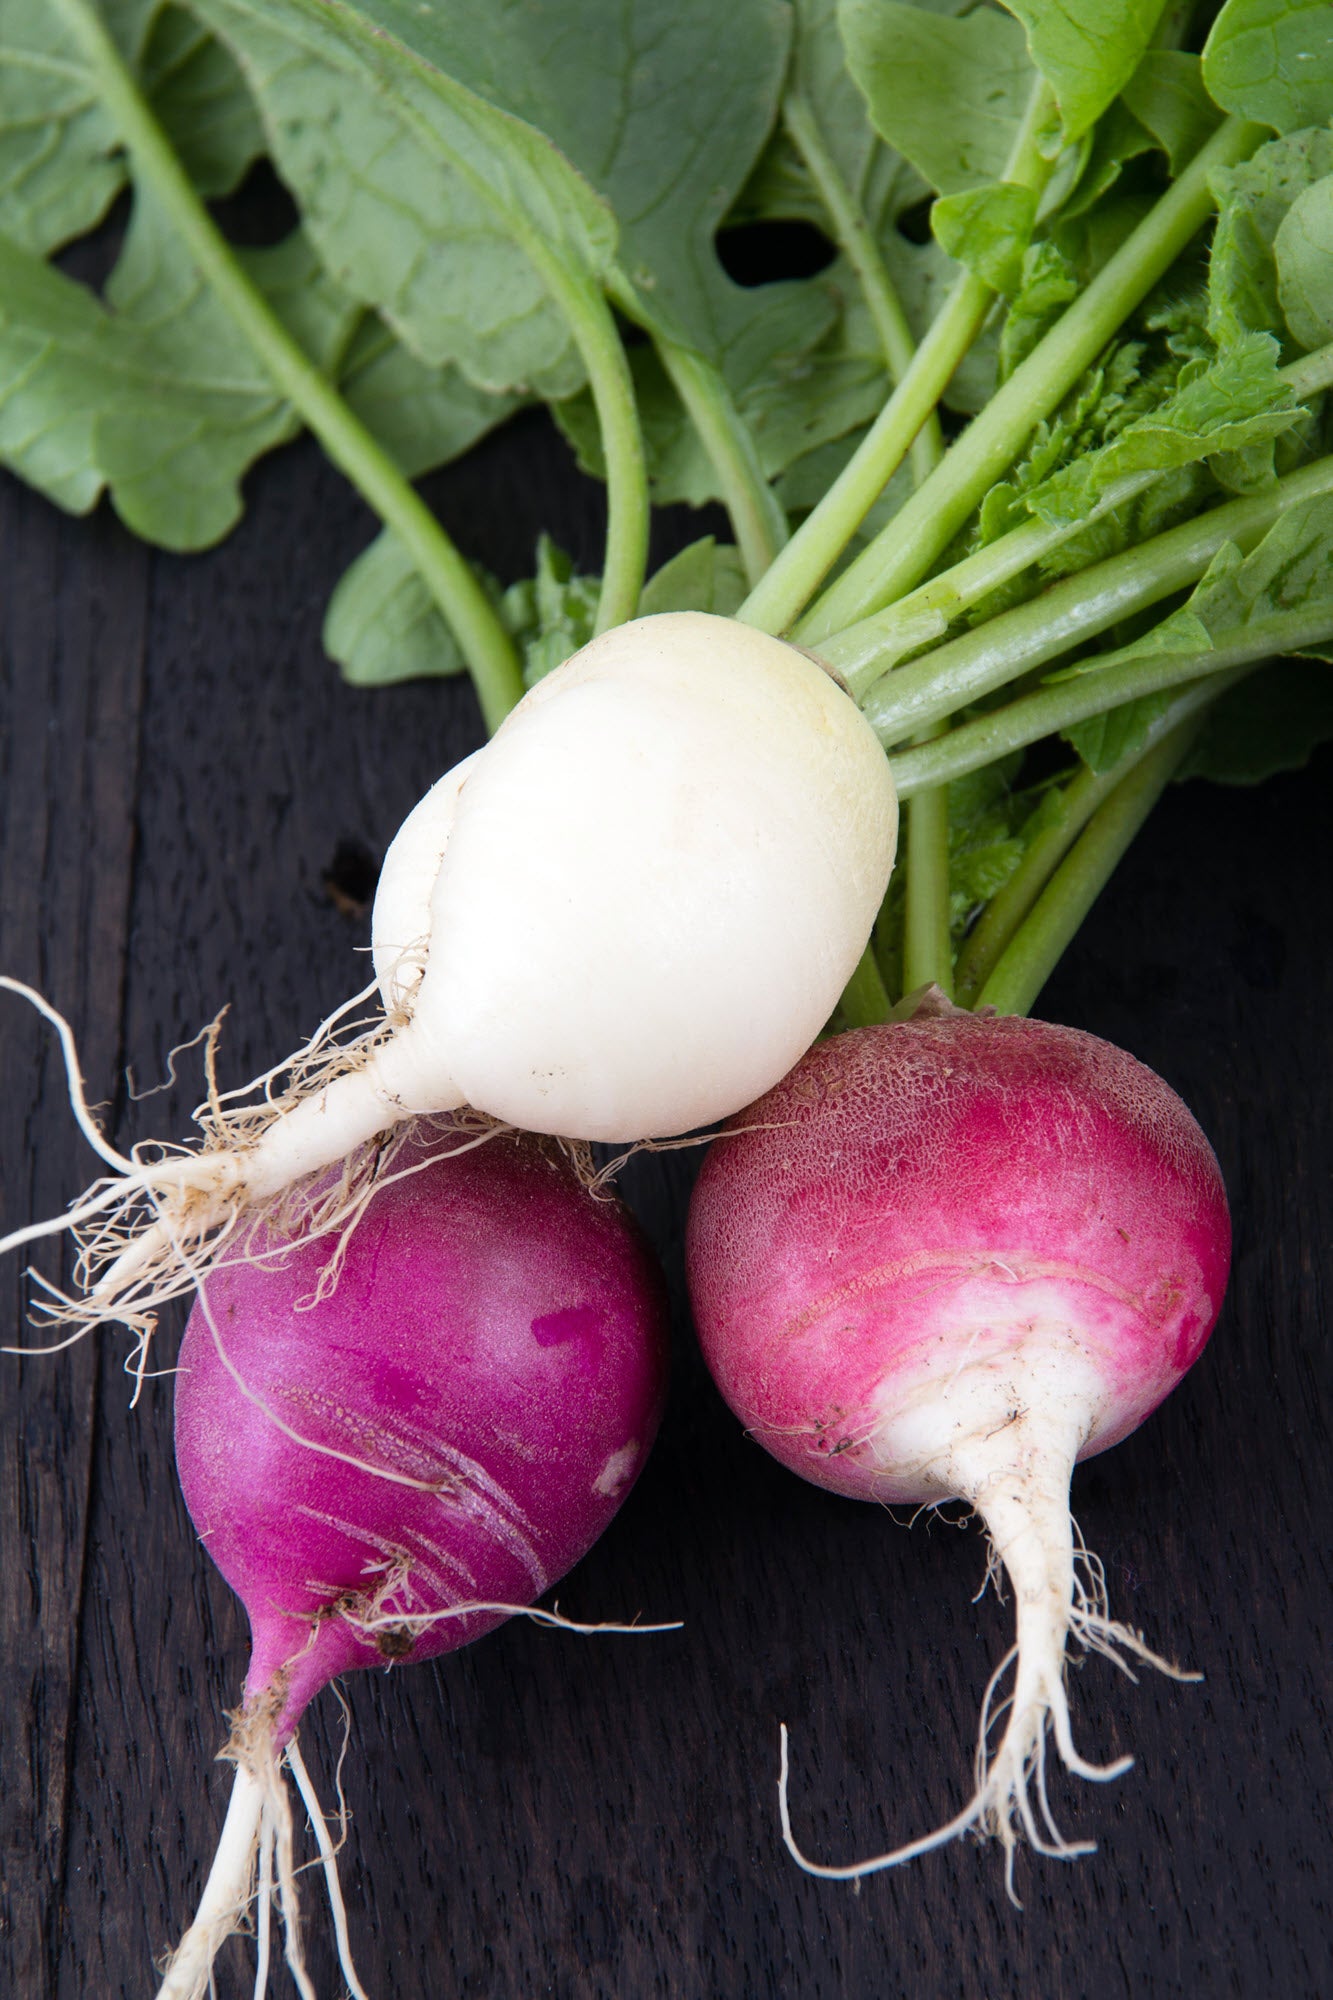 On display are 4 radishes, of the variety Easter Egg Blend. The radishes appear freshly harvested, and fully washed, with their roots a vibrant white. Their stalks are fresh and crisp at the crown, and culminate into hearty, fresh green leaves. 2 radishes are light magenta, and 2 are pure white.  The radishes rest on a wooden surface. 